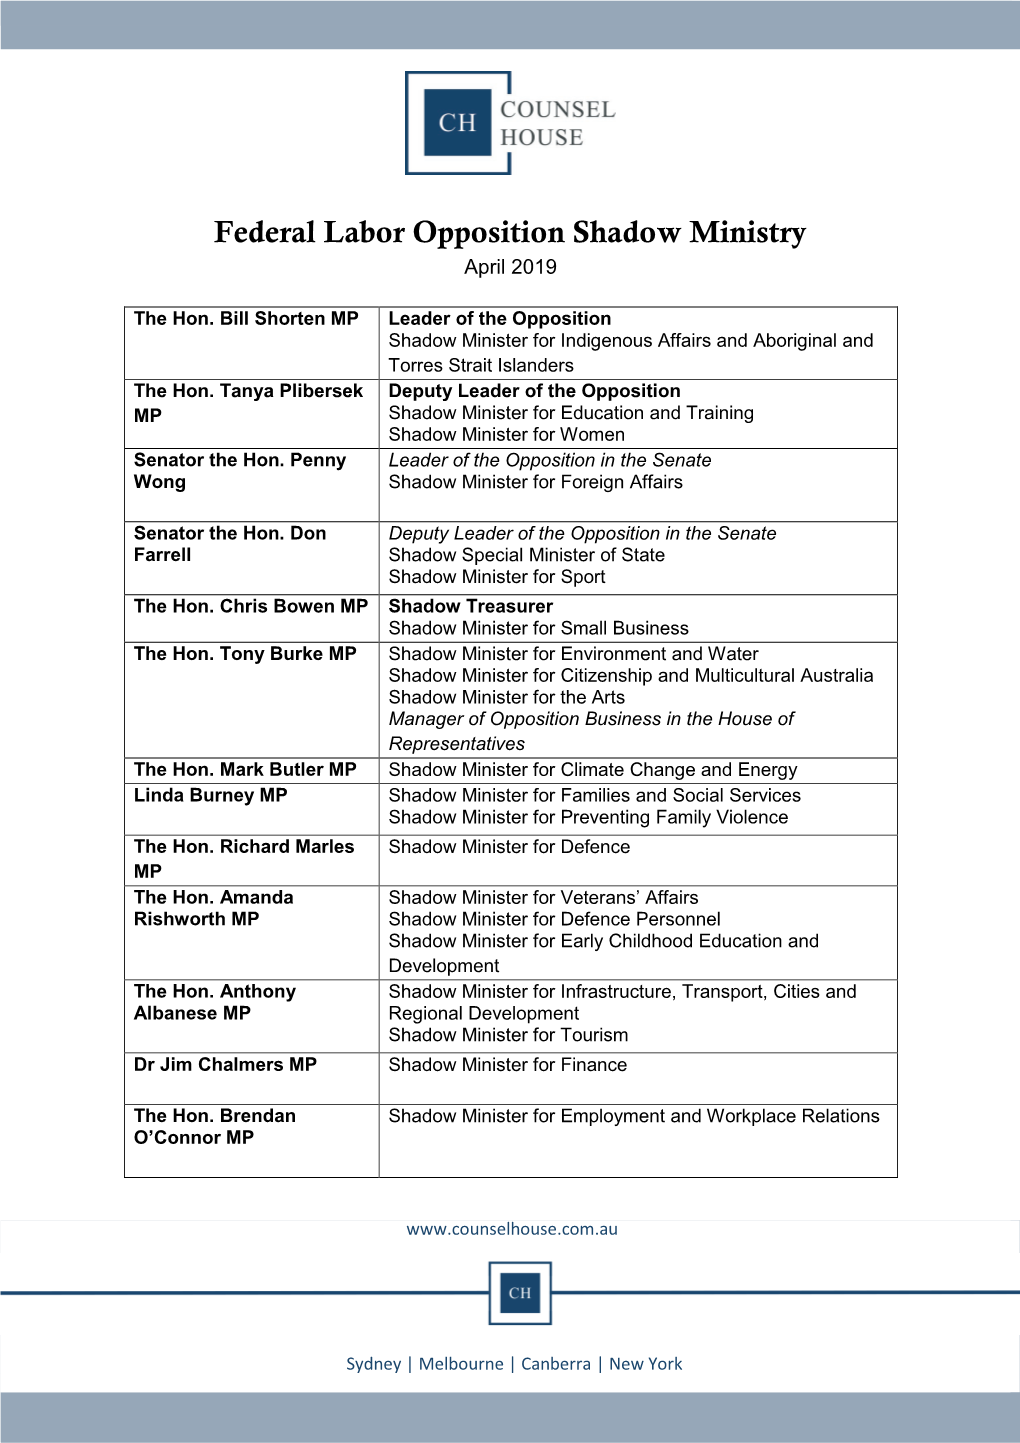 Federal Labor Opposition Shadow Ministry April 2019